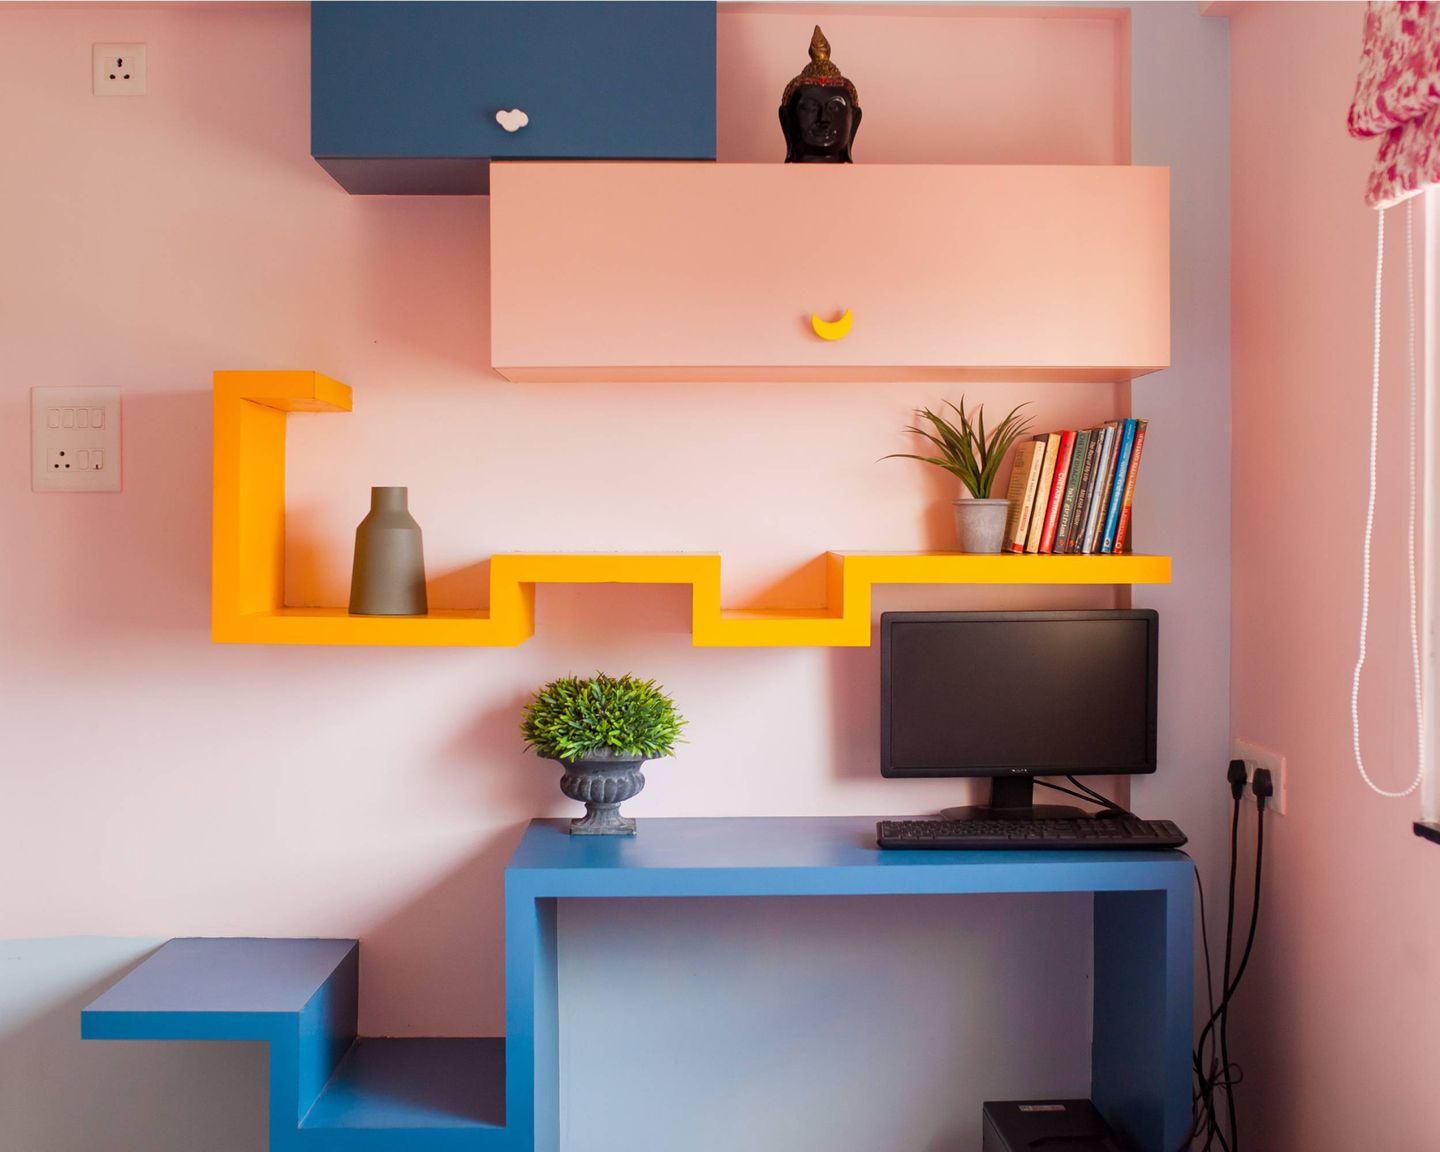 Home Office Design With Colourful Table And Wall Storage - Livspace